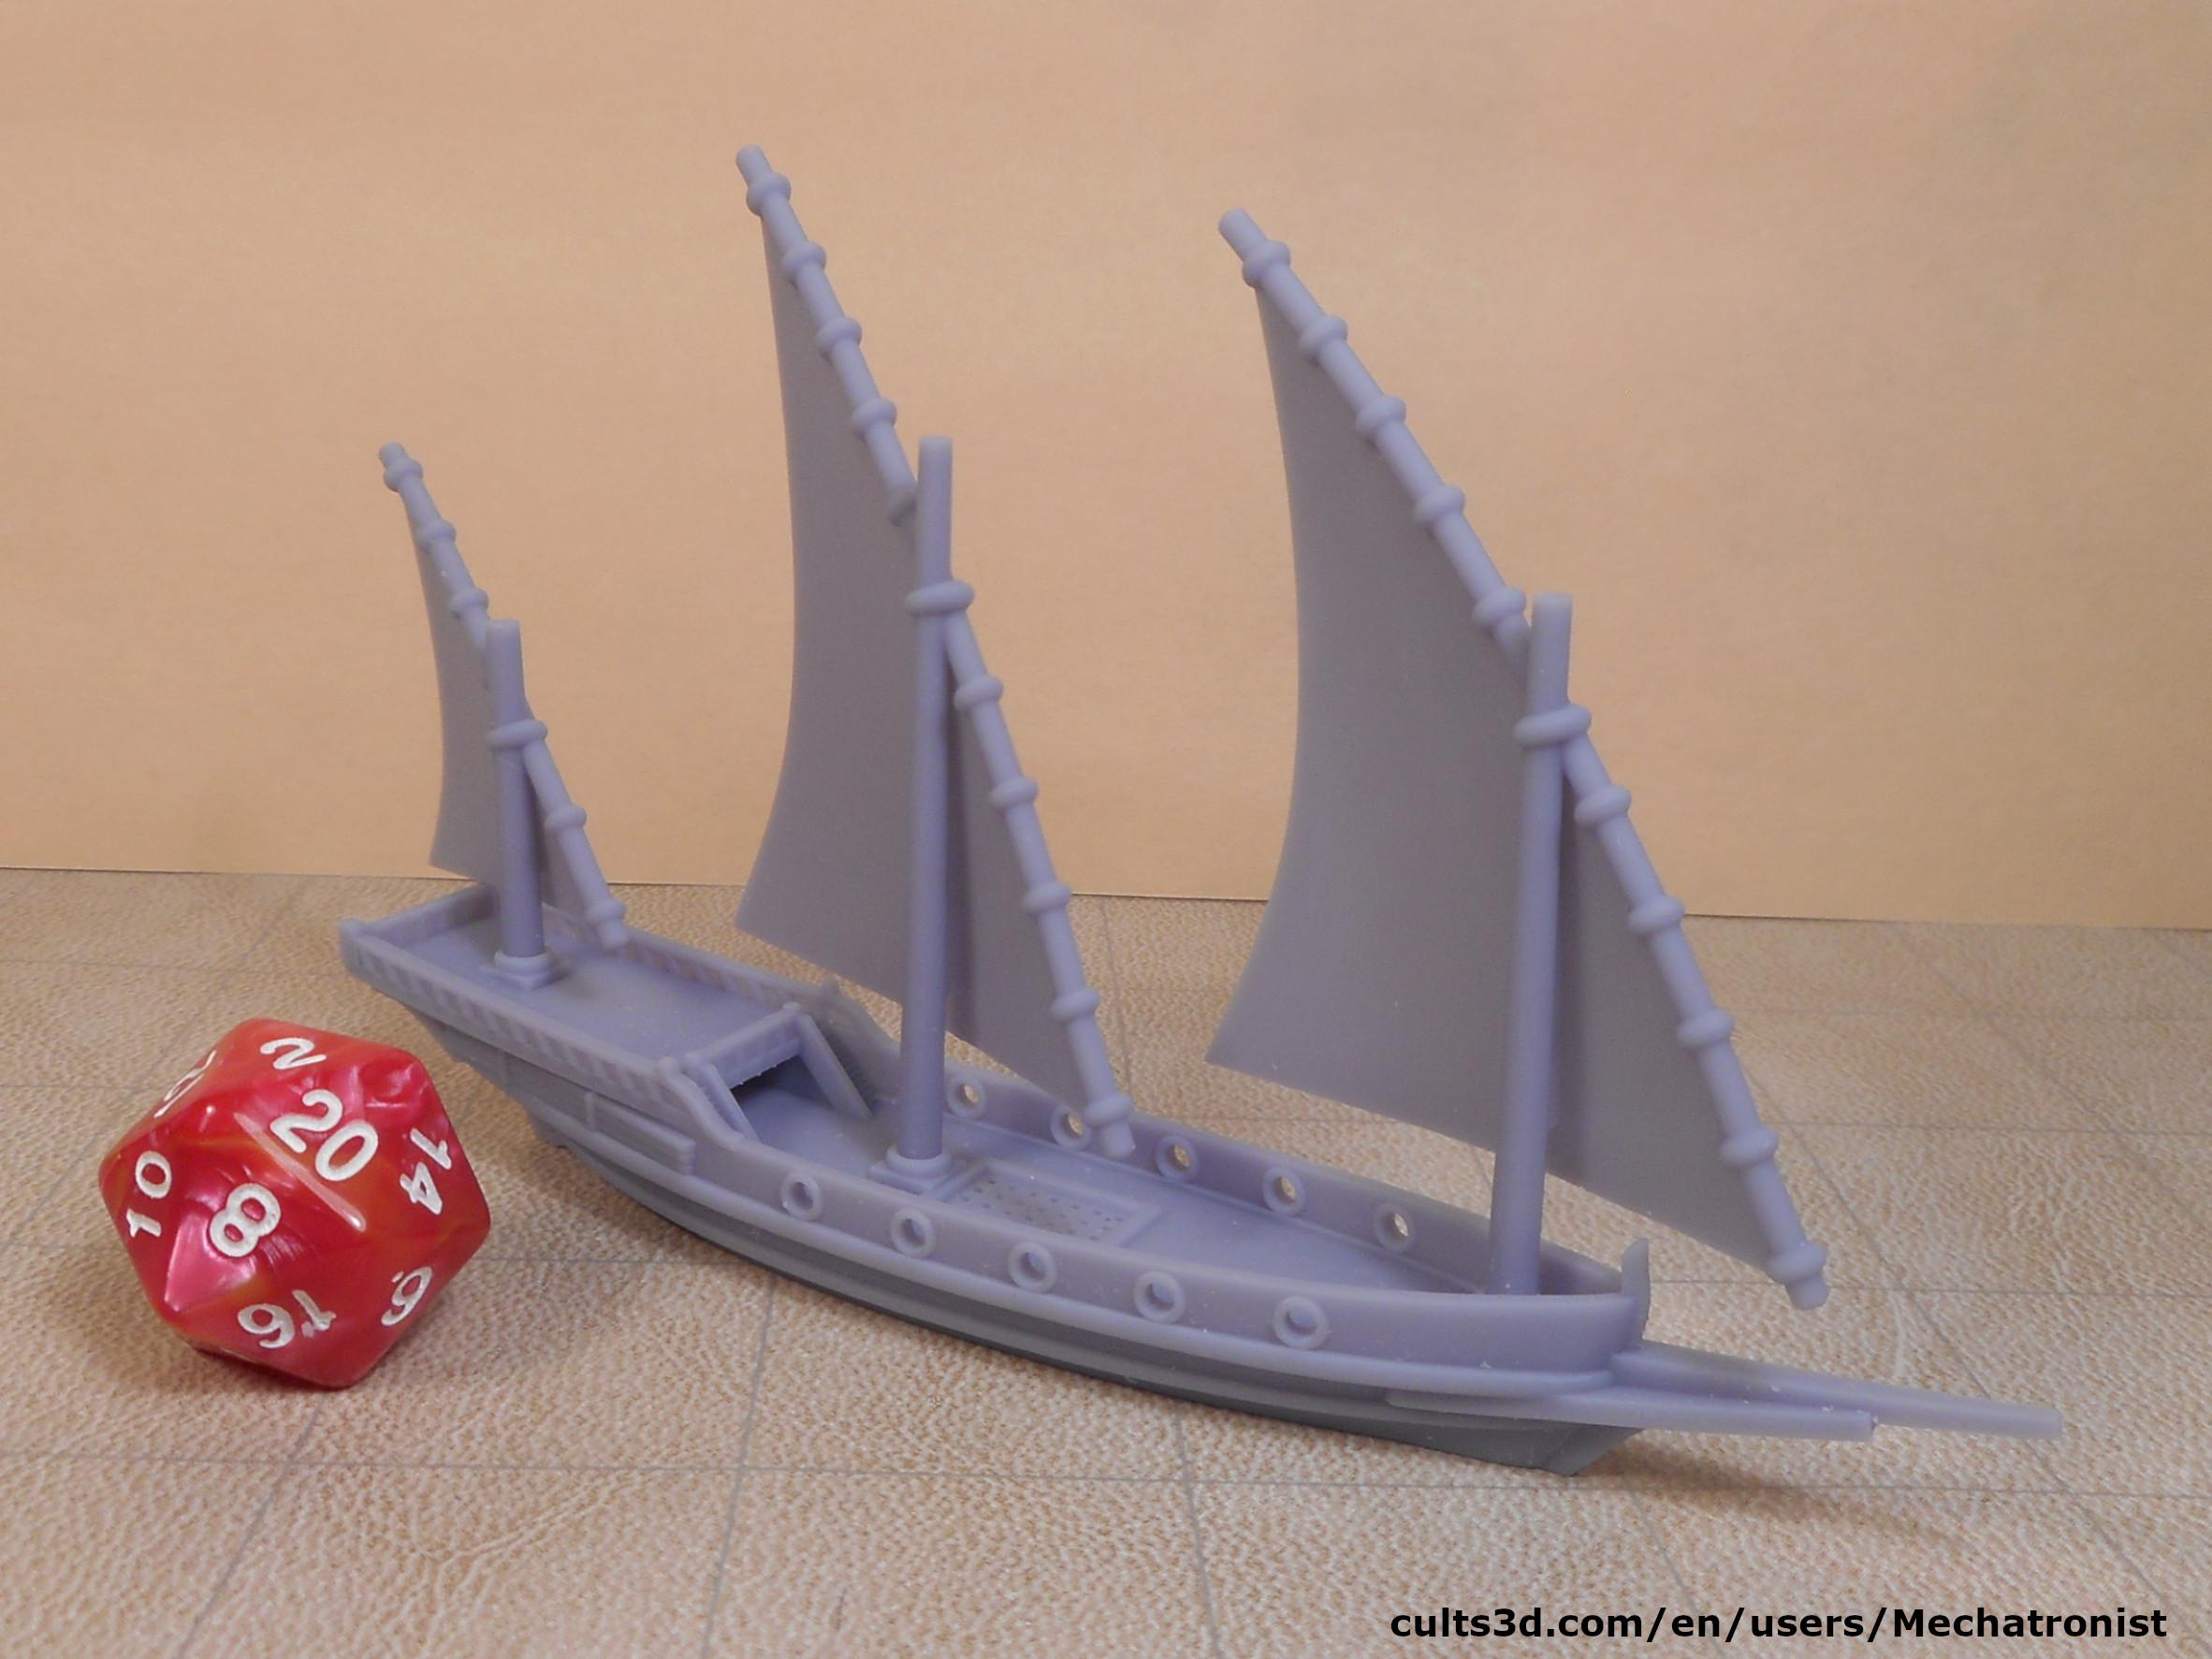 Xebec Sailing Ship Gaming Miniature Compatible with DnD Spelljammer 3d model